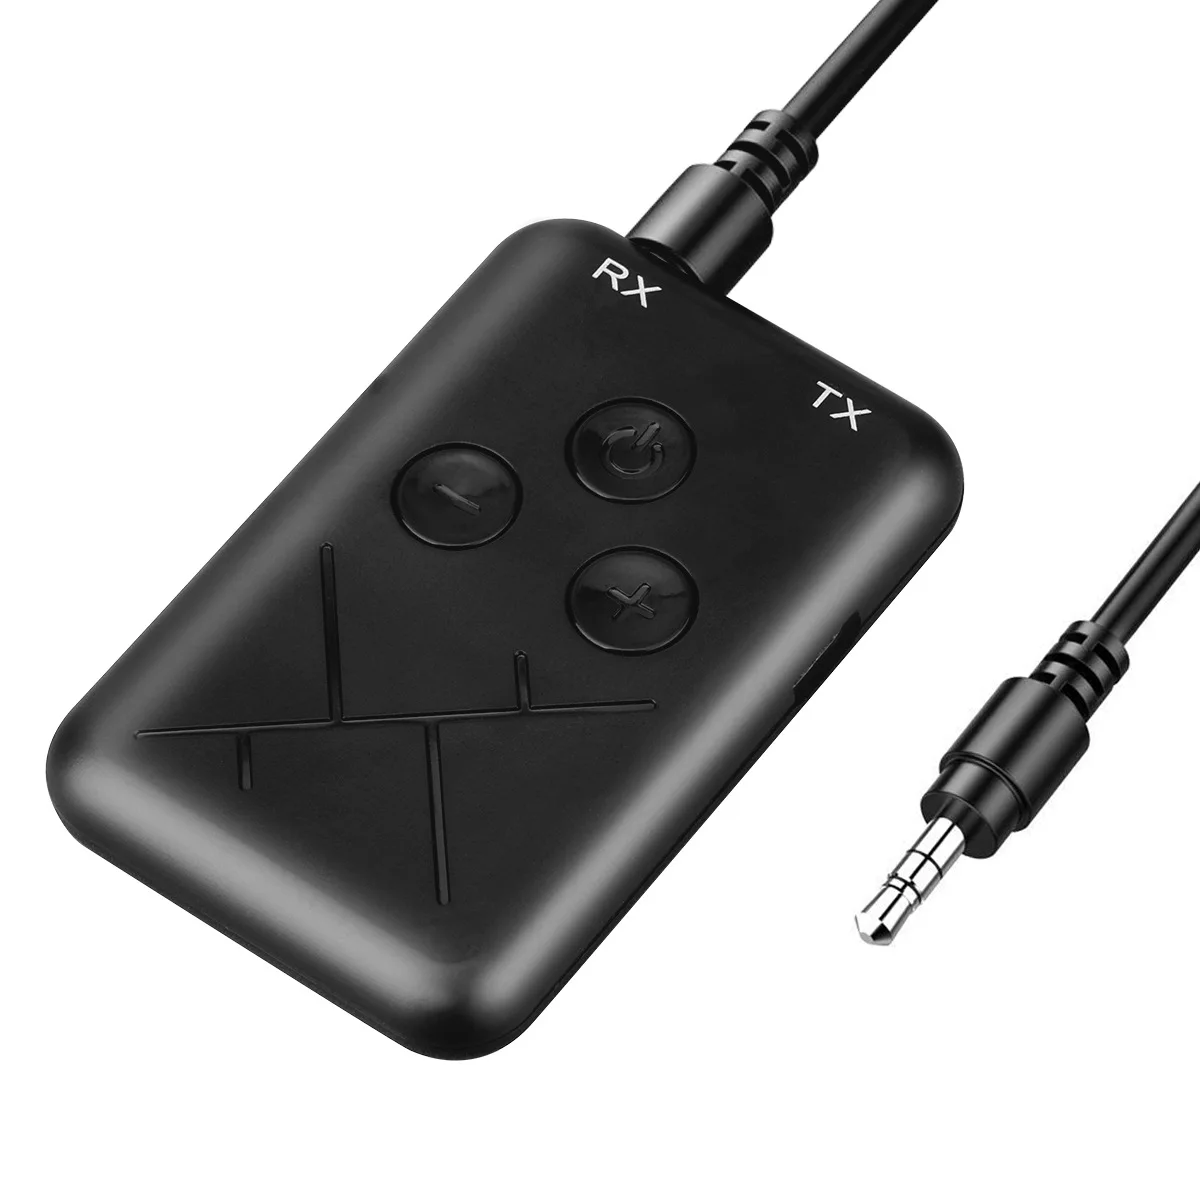 Bluetooth Receiver Transmitter 2 in 1 Stereo APTX Wireless Aux Audio Receiver 3.5mm Jack RCA Car Adapter for TV PC BT 5.0 4.2